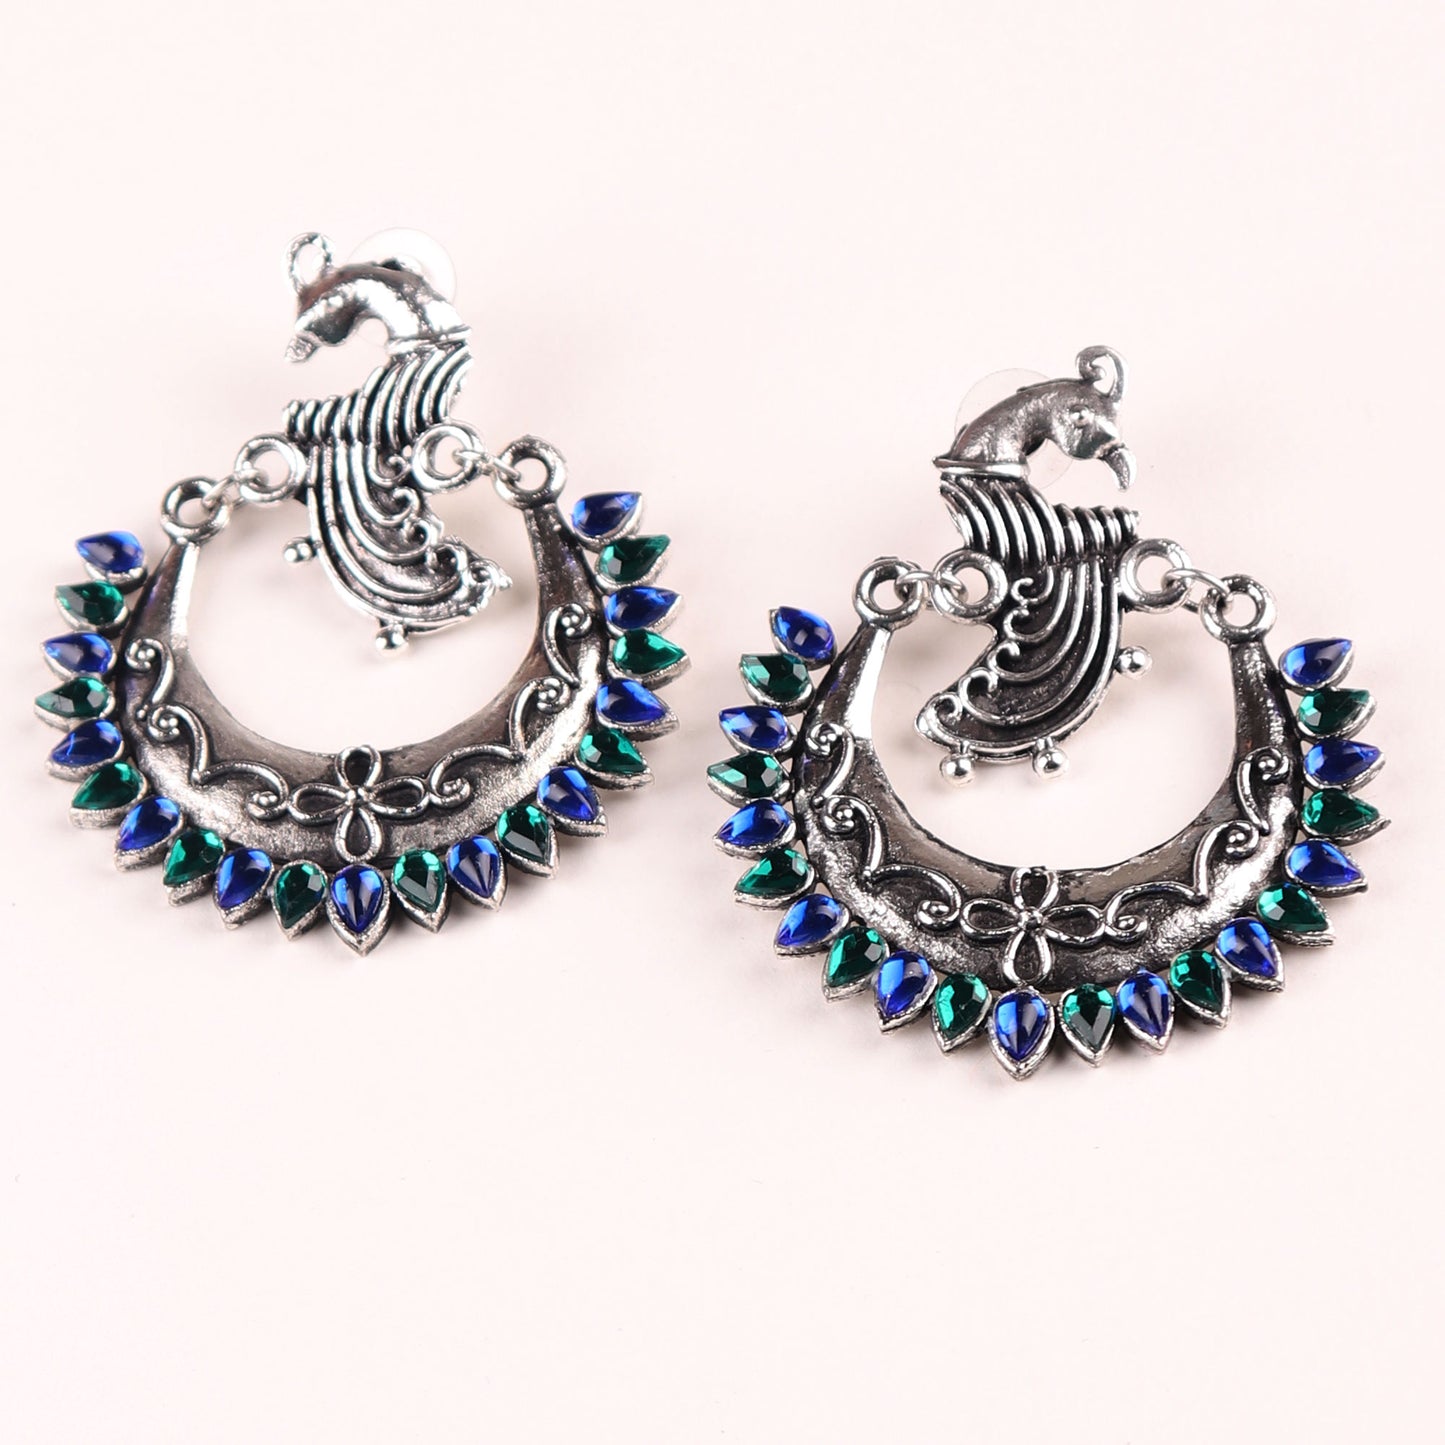 Earrings,The Peacock in the Moon in Midnight Blue & Turquoise - Cippele Multi Store